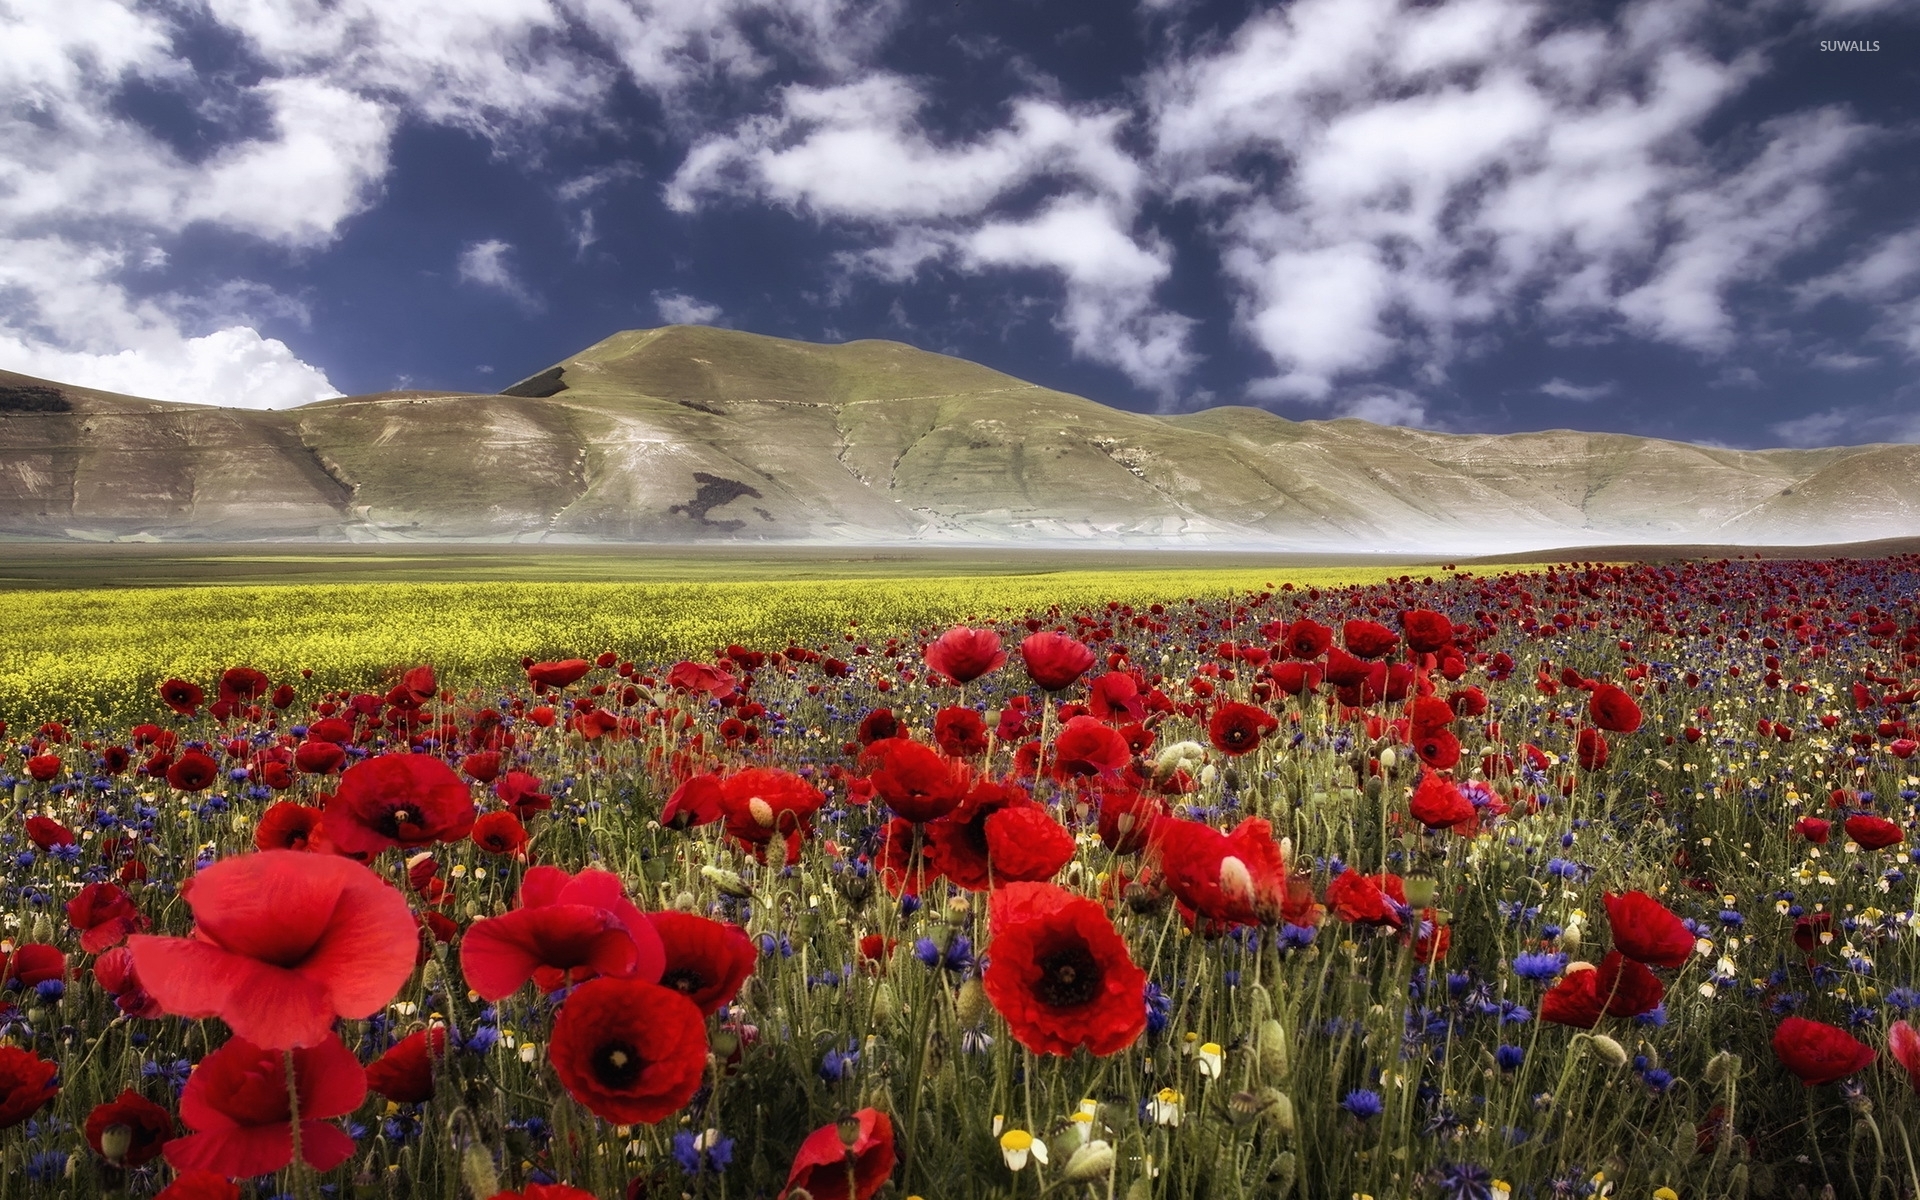 Wild flowers mixed in the field by the hill wallpaper - Nature wallpapers -  #54194